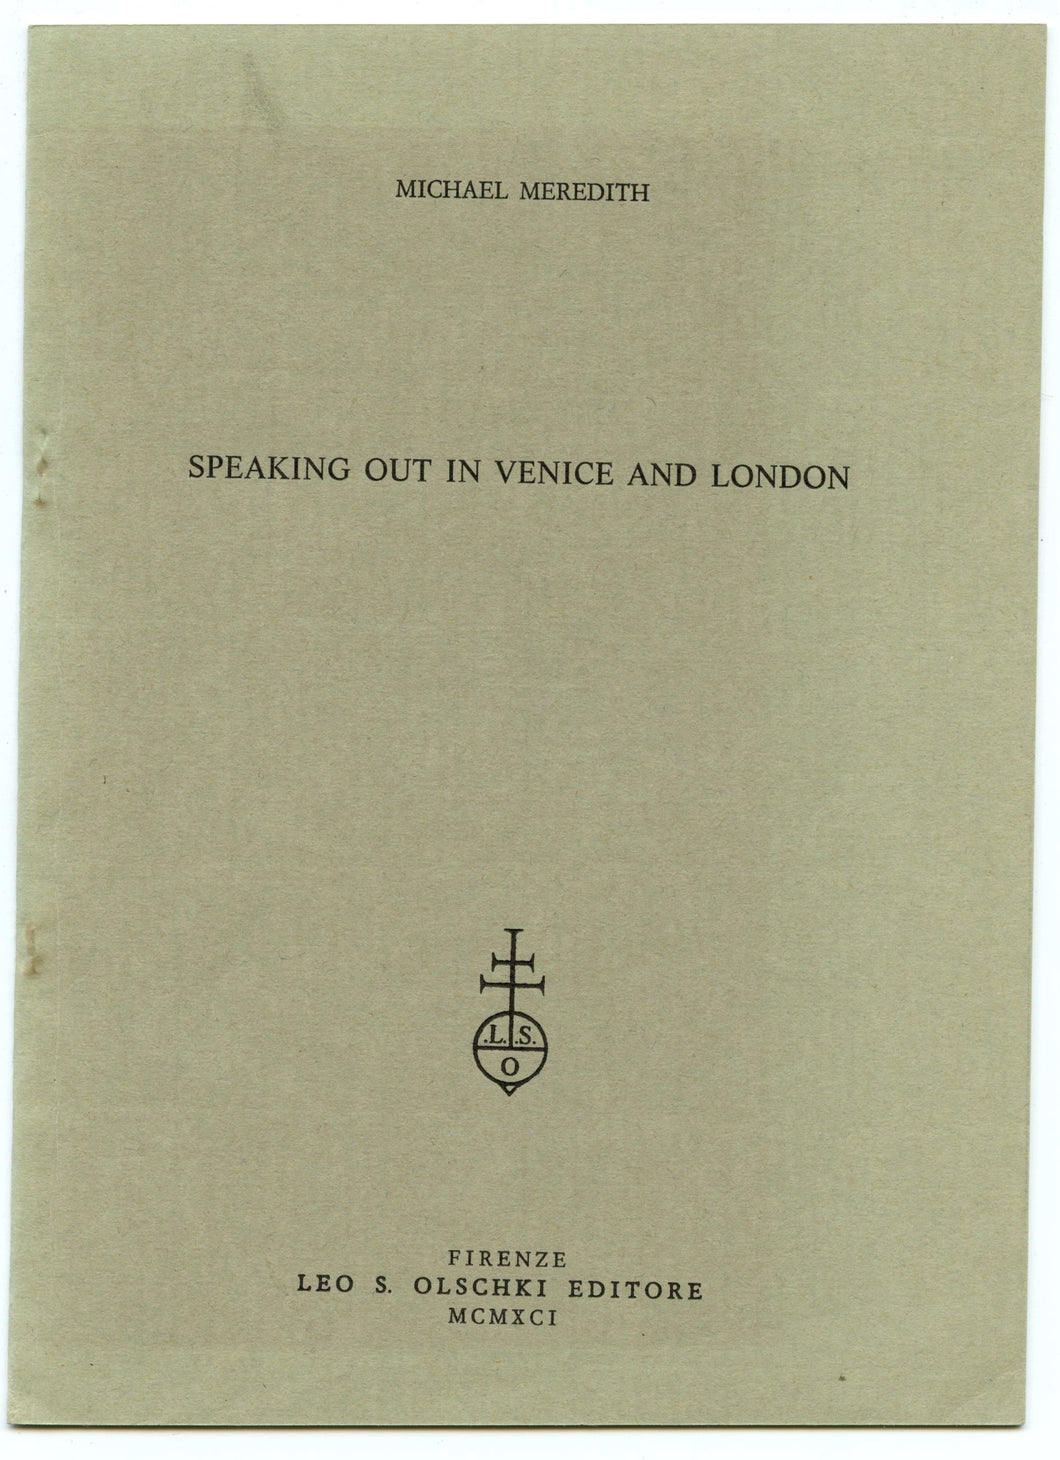 Speaking Out in Venice and London